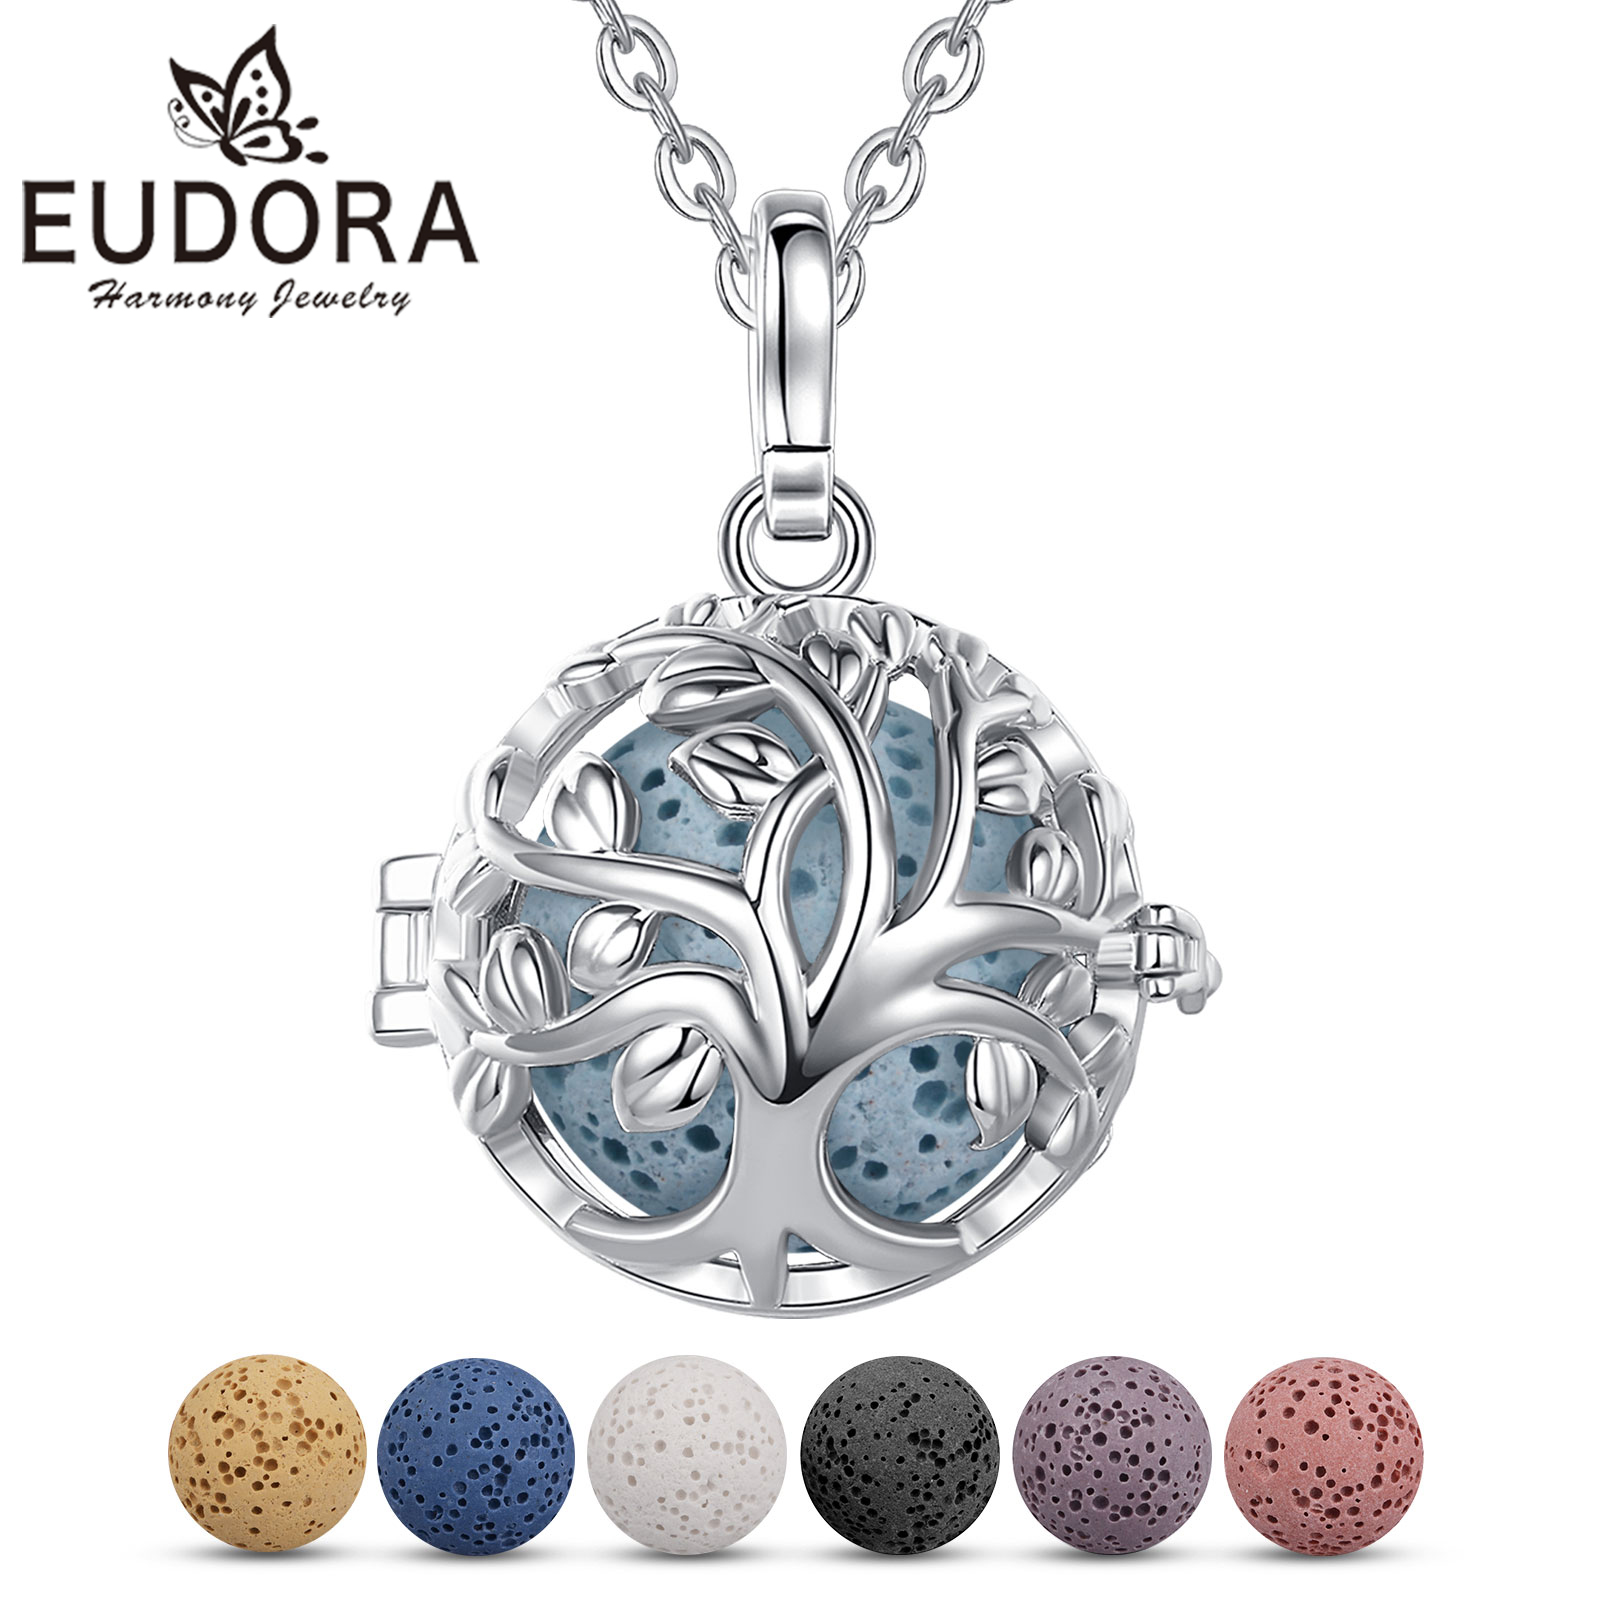 EUDORA 18mm Tree of Life Cage Lave Pendant Aromatherapy Locket Diffuser Necklace Fit Volcanic Lava Stone Ball Fine Women Jewelry